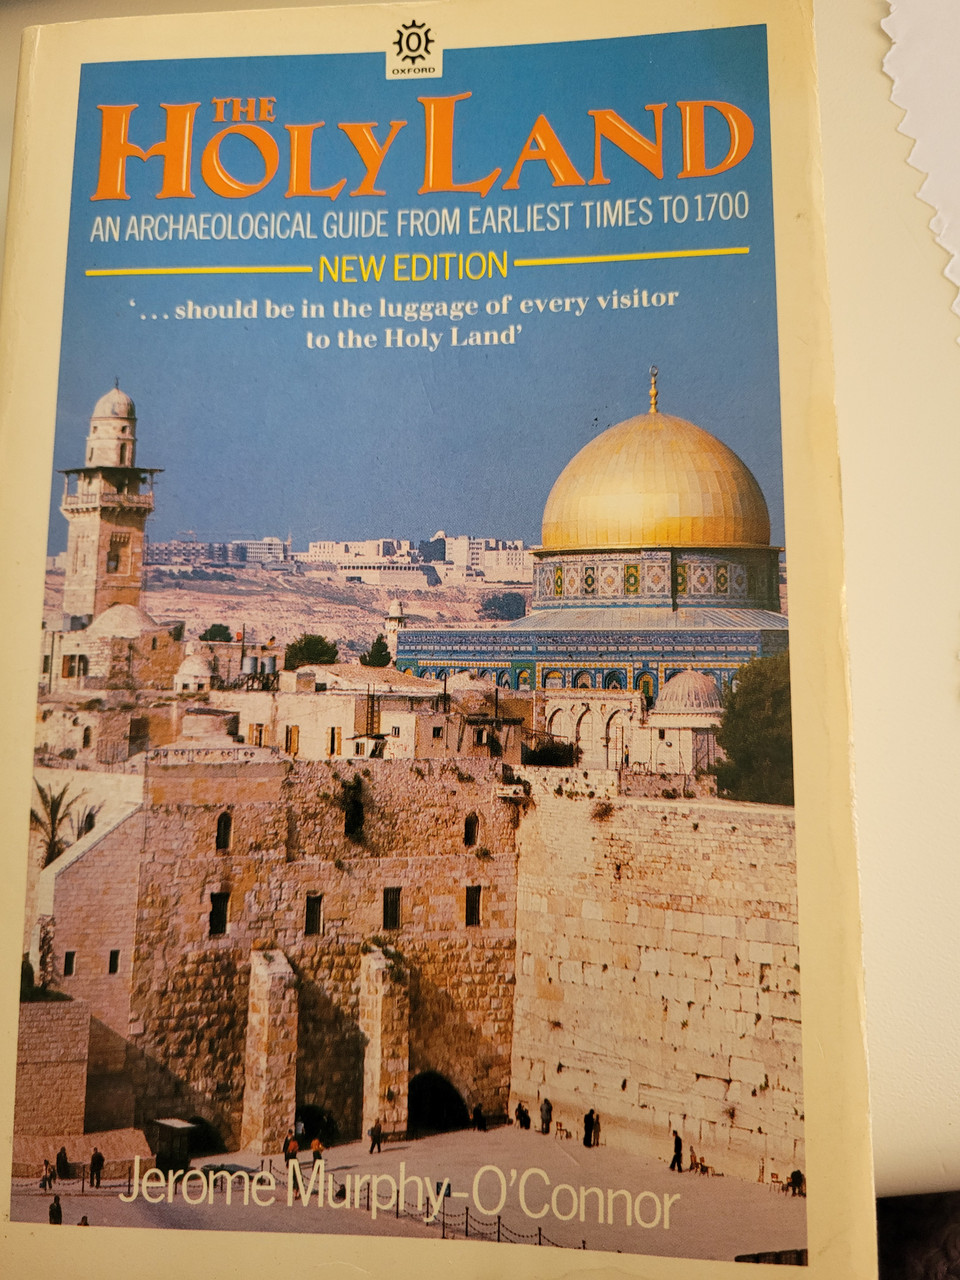 The Holy Land An Archaelogical Guide From Earliest Times to 1700